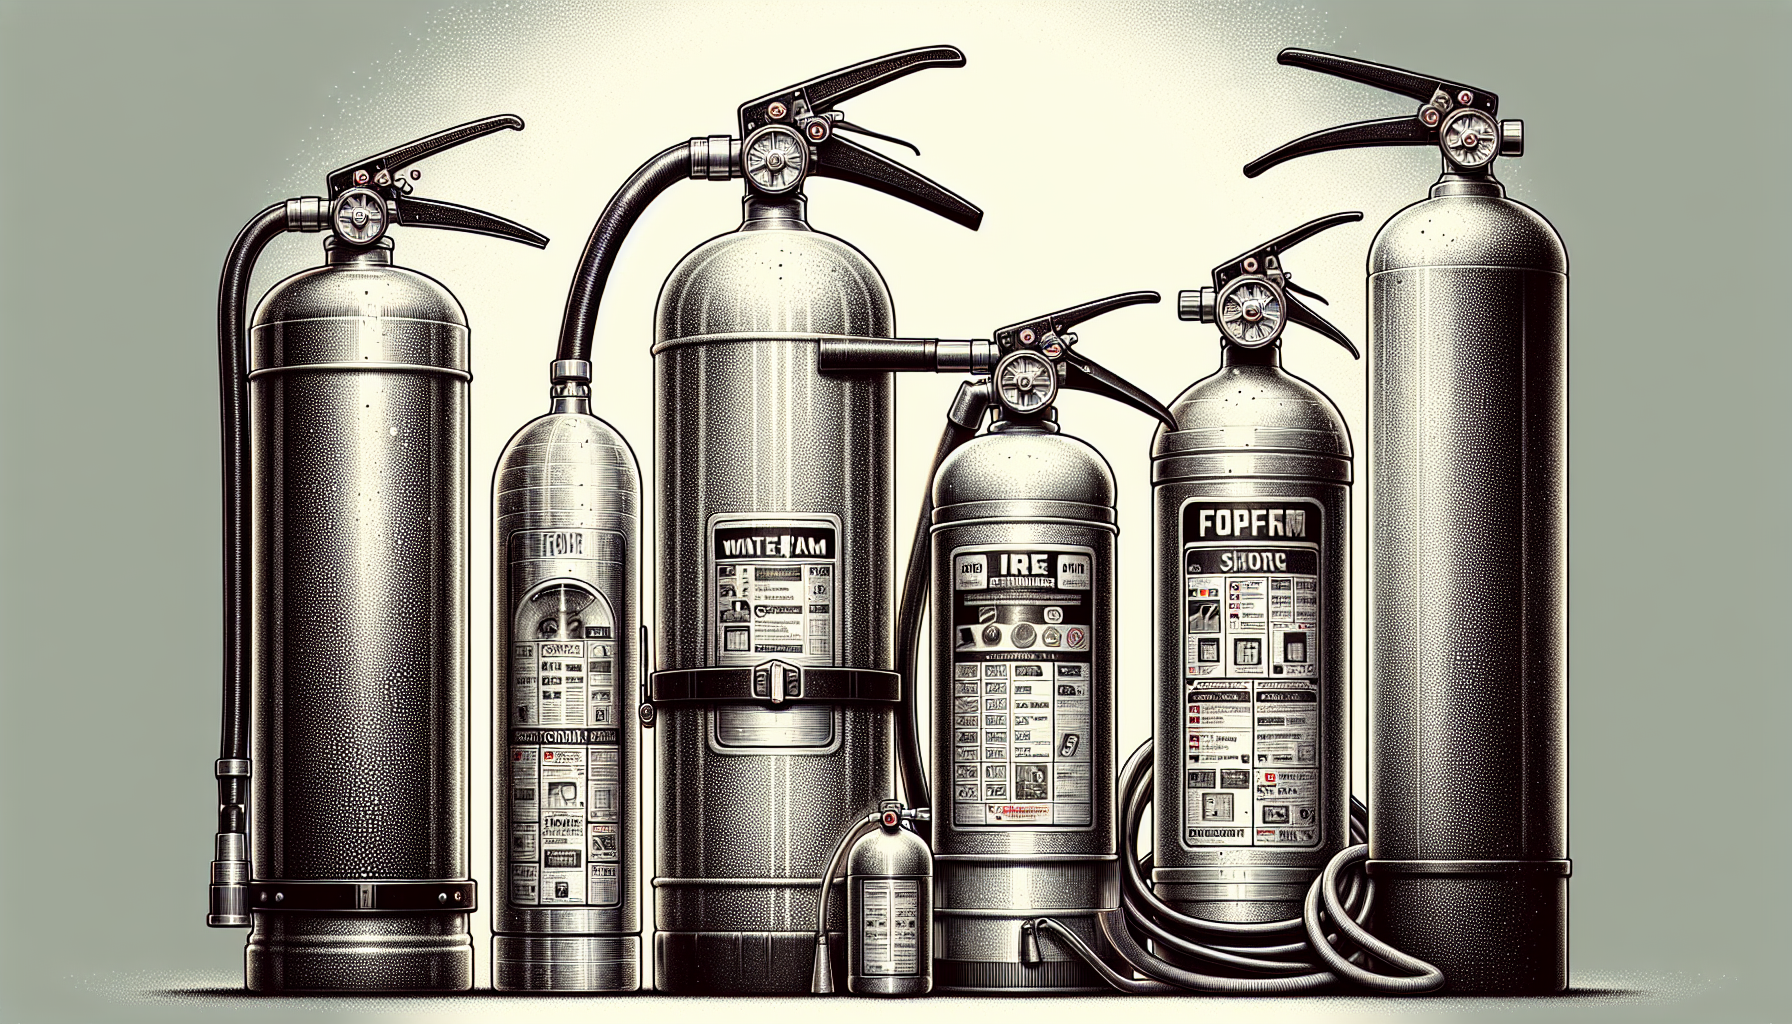 Illustration of different types of fire extinguishers